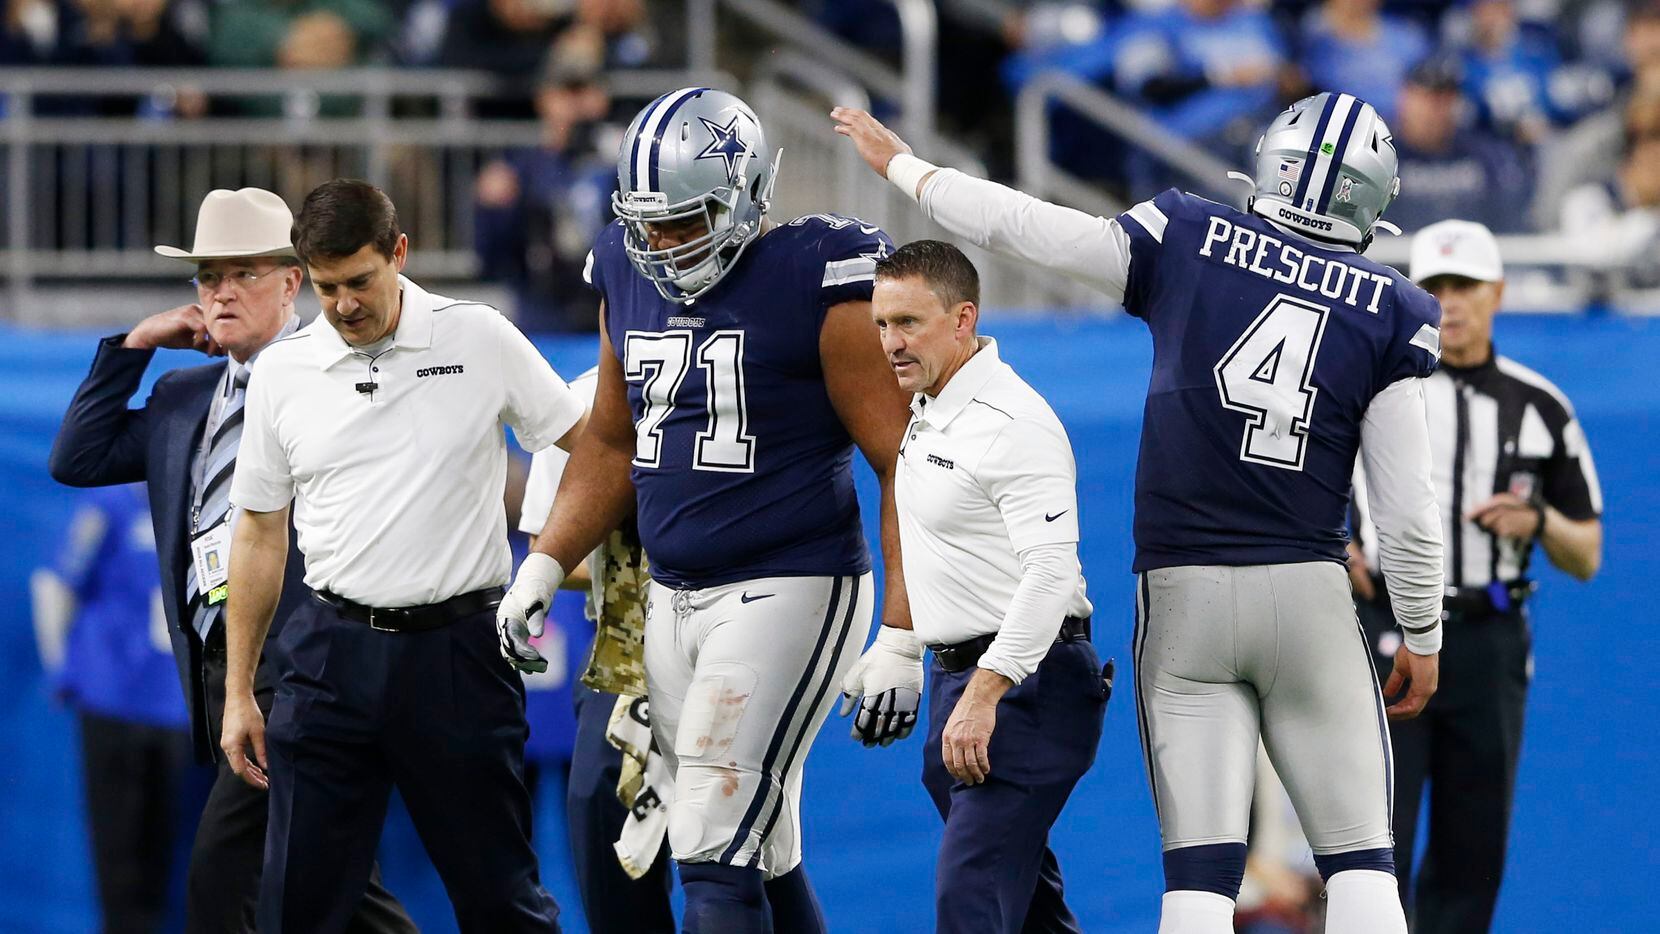 Dallas Cowboys quarterback Dak Prescott (4) taps Dallas Cowboys offensive tackle La'el Collins (71) as he walks off the field with the medical staff during the second half of play at Ford Field in Detroit, on Sunday, November 17, 2019. Dallas Cowboys defeated the Detroit Lions 35-27. (Vernon Bryant/The Dallas Morning News)